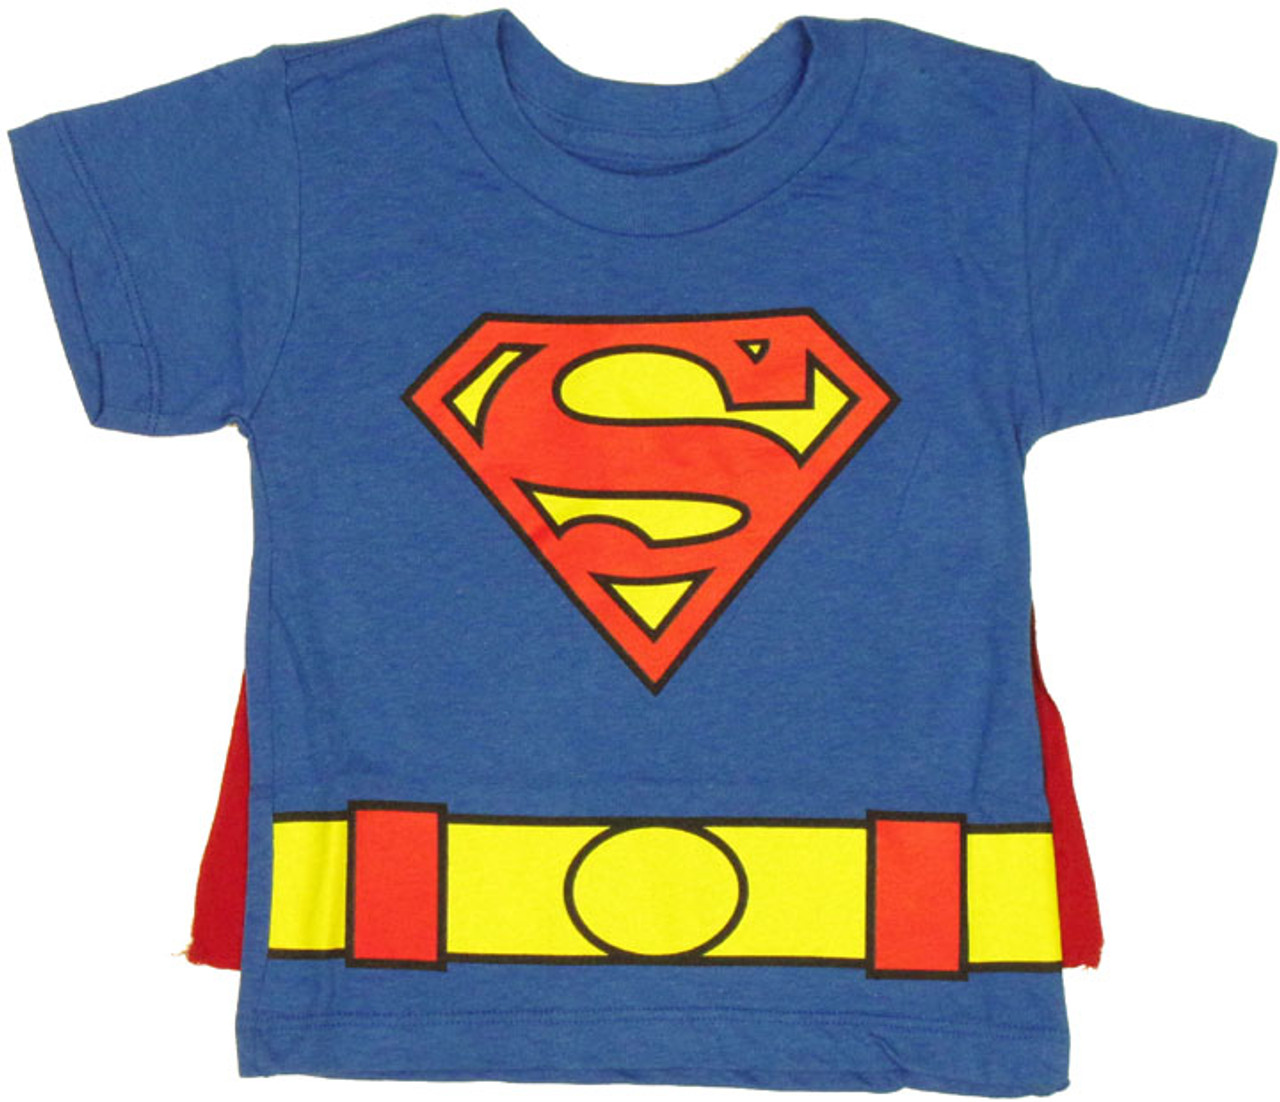 BATMAN OR SUPERMAN TSHIRT WITH REMOVABLE CAPE